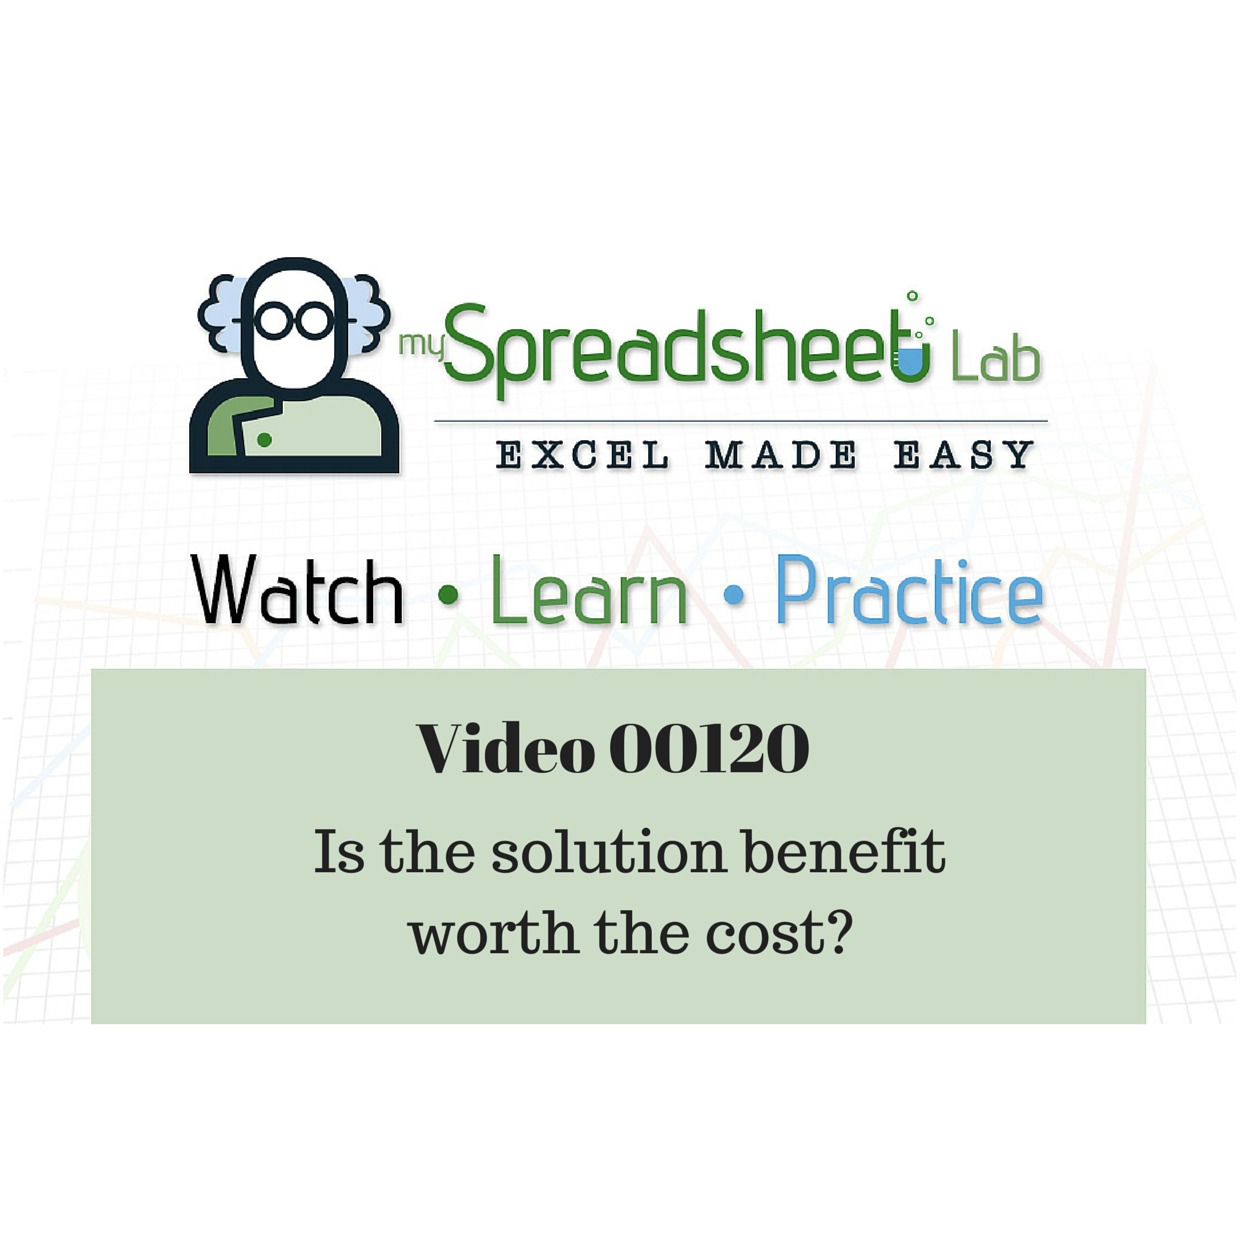 Video 00120 Is the solution benefit worth the cost